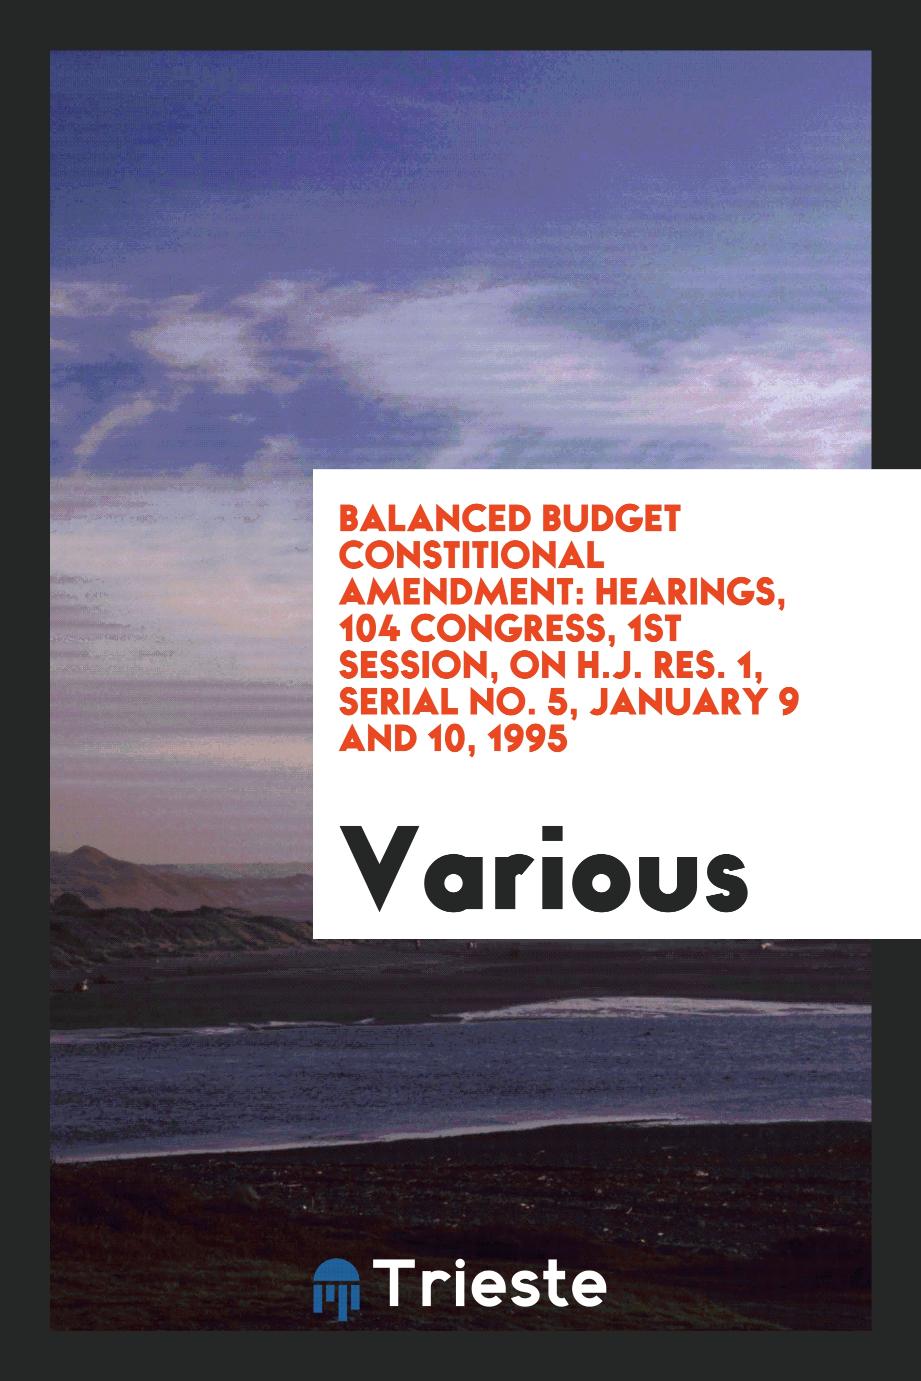 Balanced budget constitional amendment: hearings, 104 Congress, 1st session, on H.J. Res. 1, serial No. 5, January 9 and 10, 1995